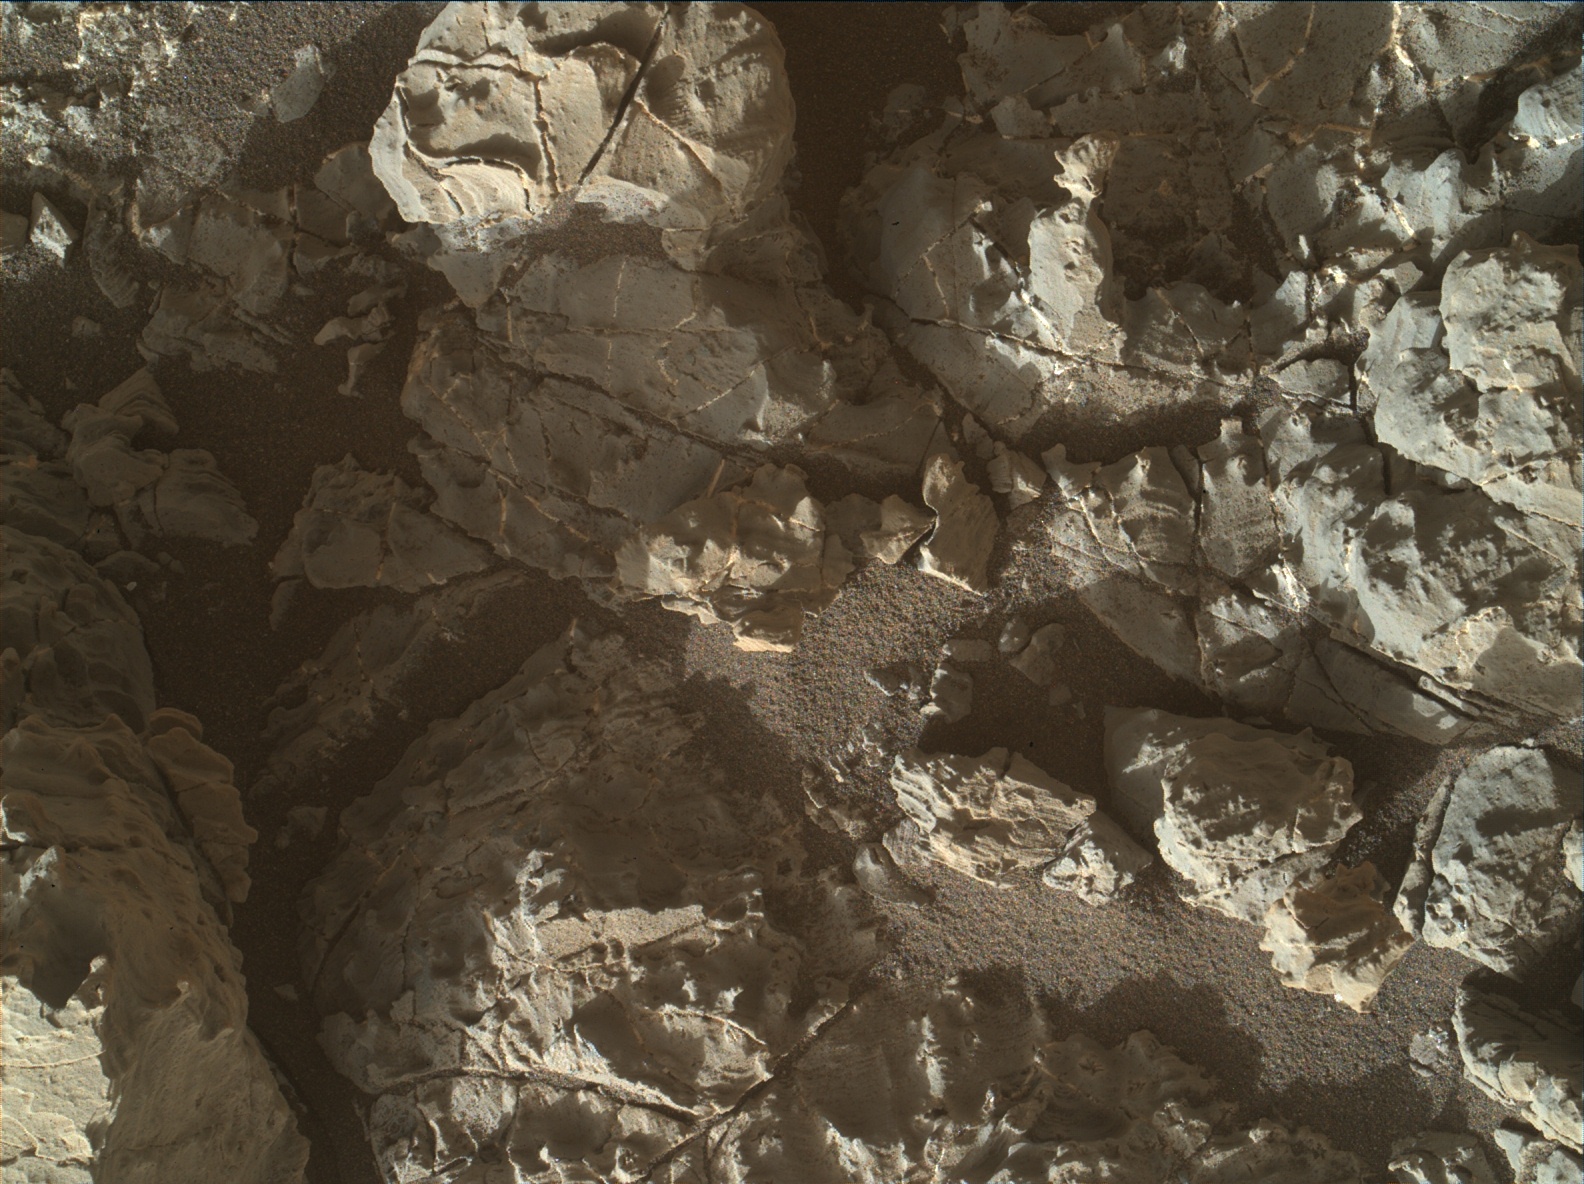 Nasa's Mars rover Curiosity acquired this image using its Mars Hand Lens Imager (MAHLI) on Sol 1933